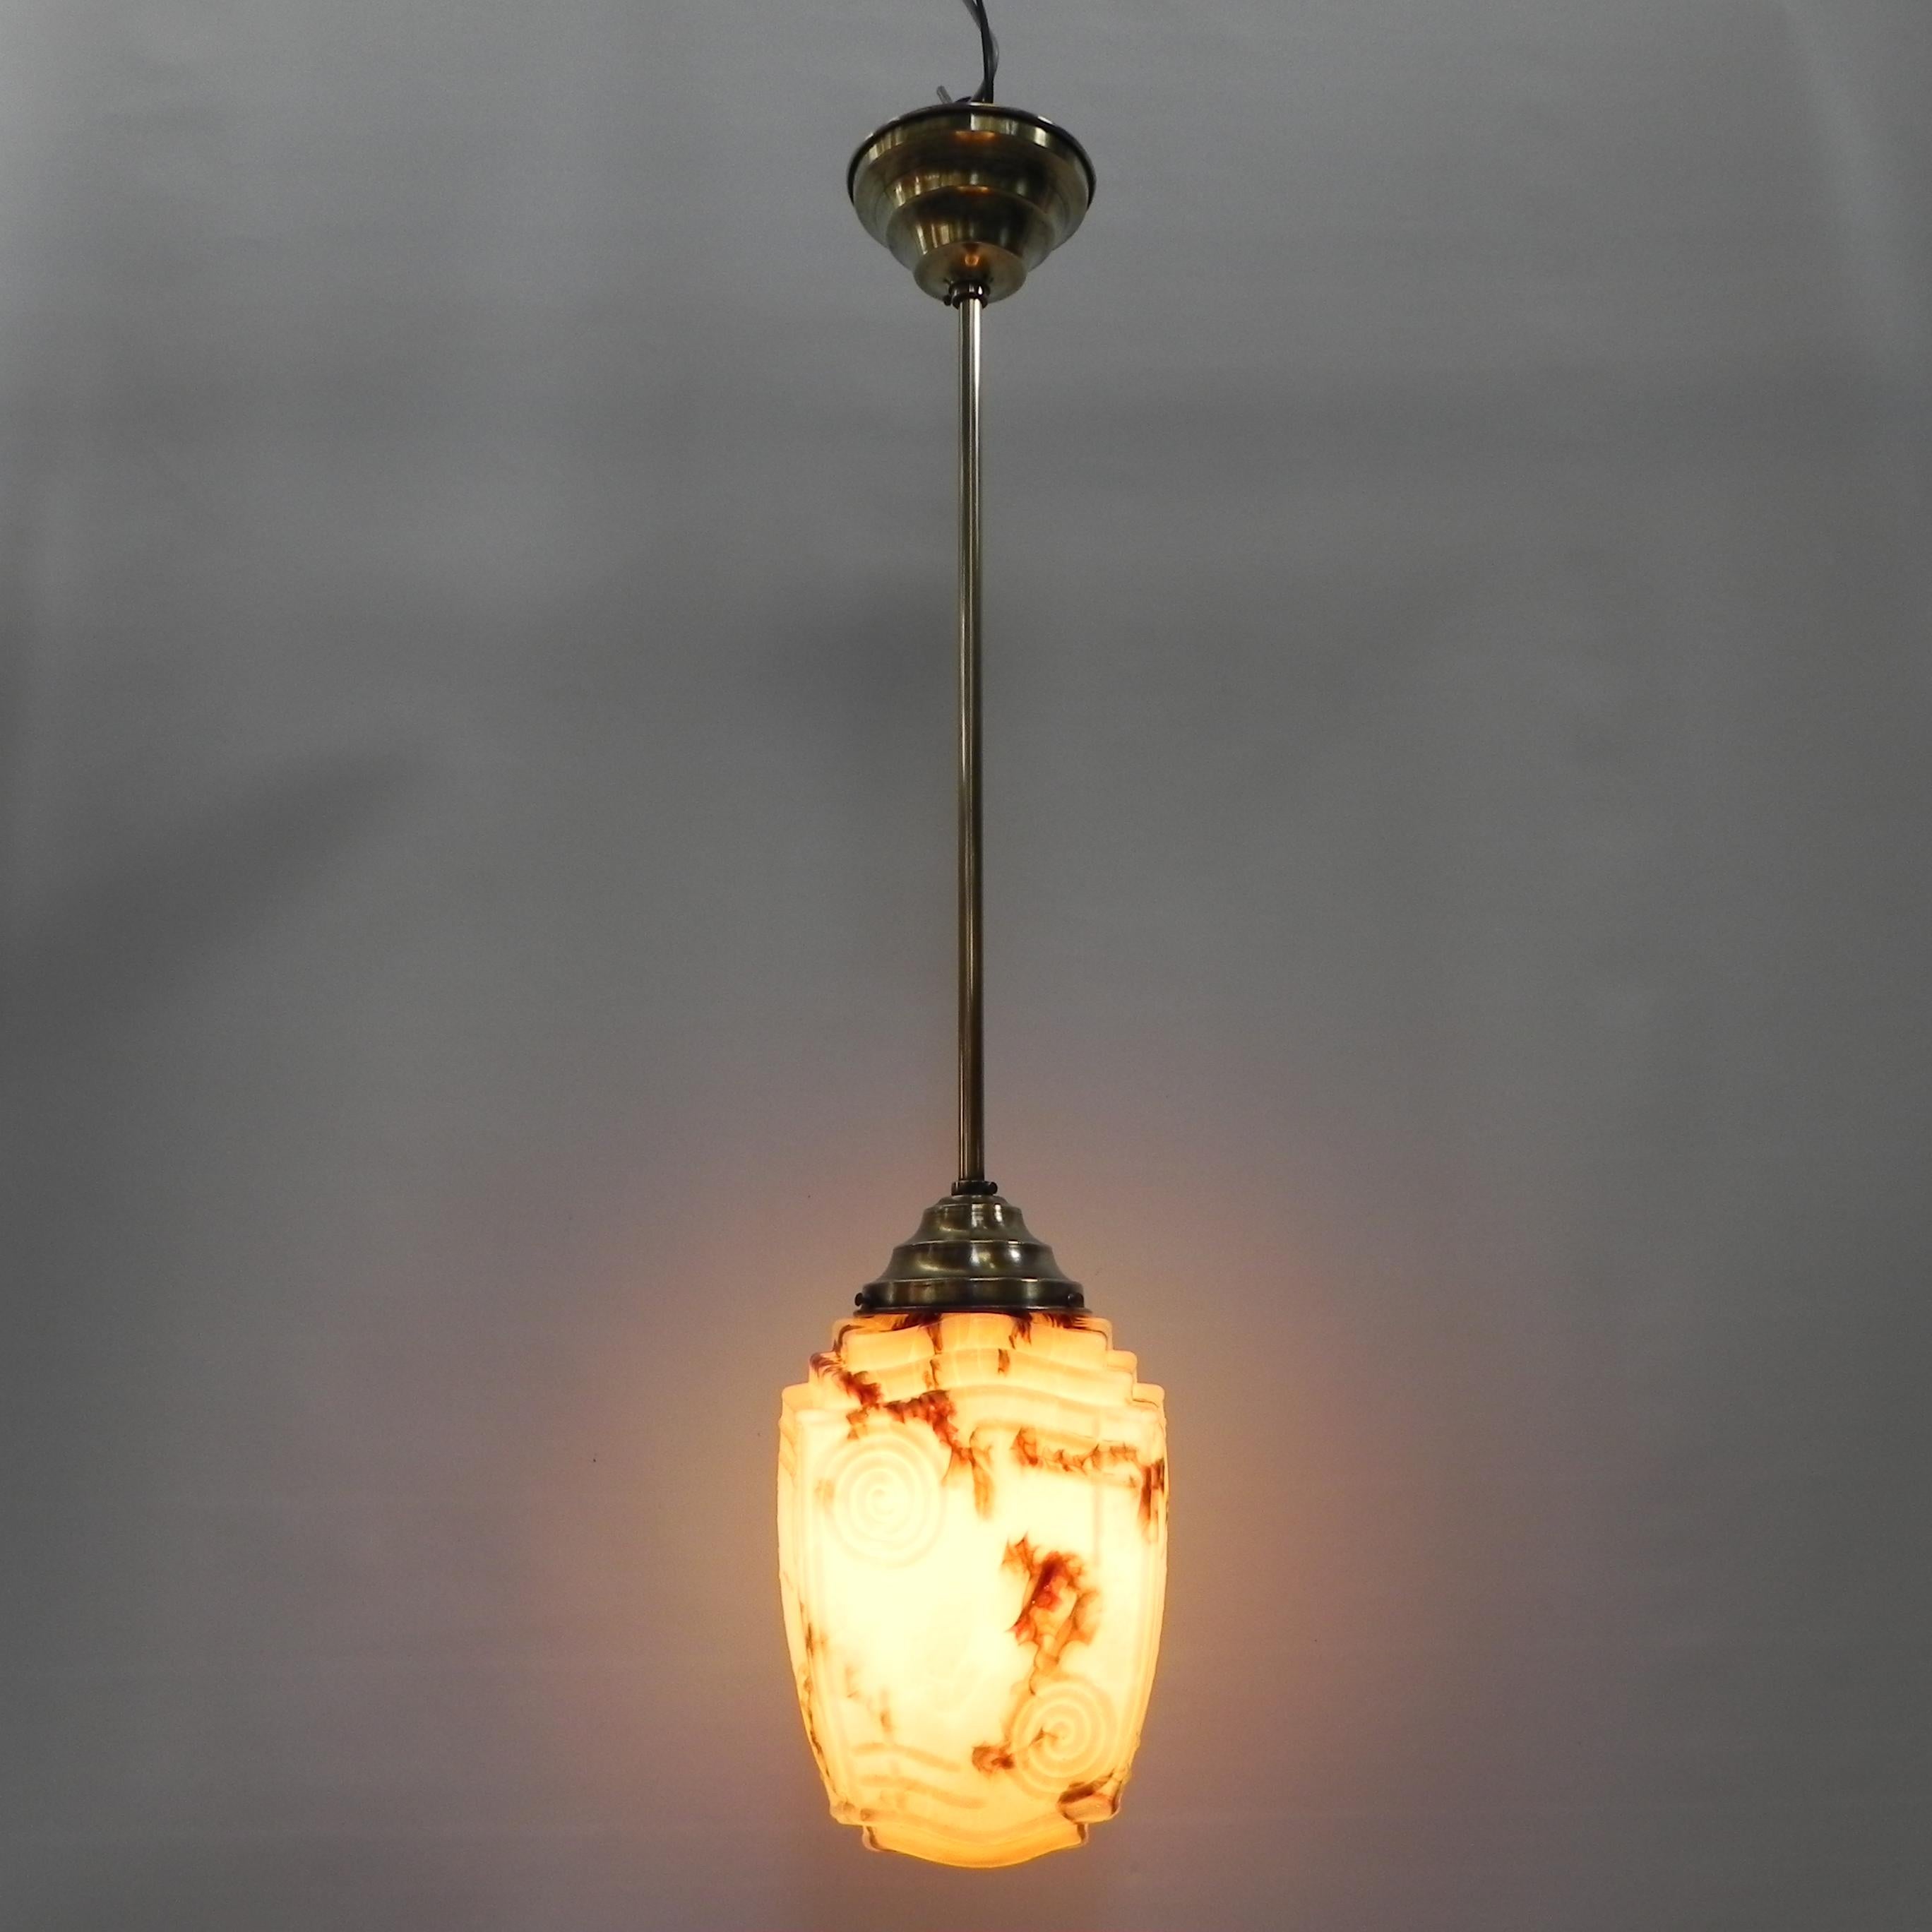 Total height: 85 cm.
Ø: 20 cm.
Height hood: 24 cm.
This lamp is equipped with a
large bulb holder (E27) and new thread.
Origin: Belgium, 1930s.
Material: brass / glass.